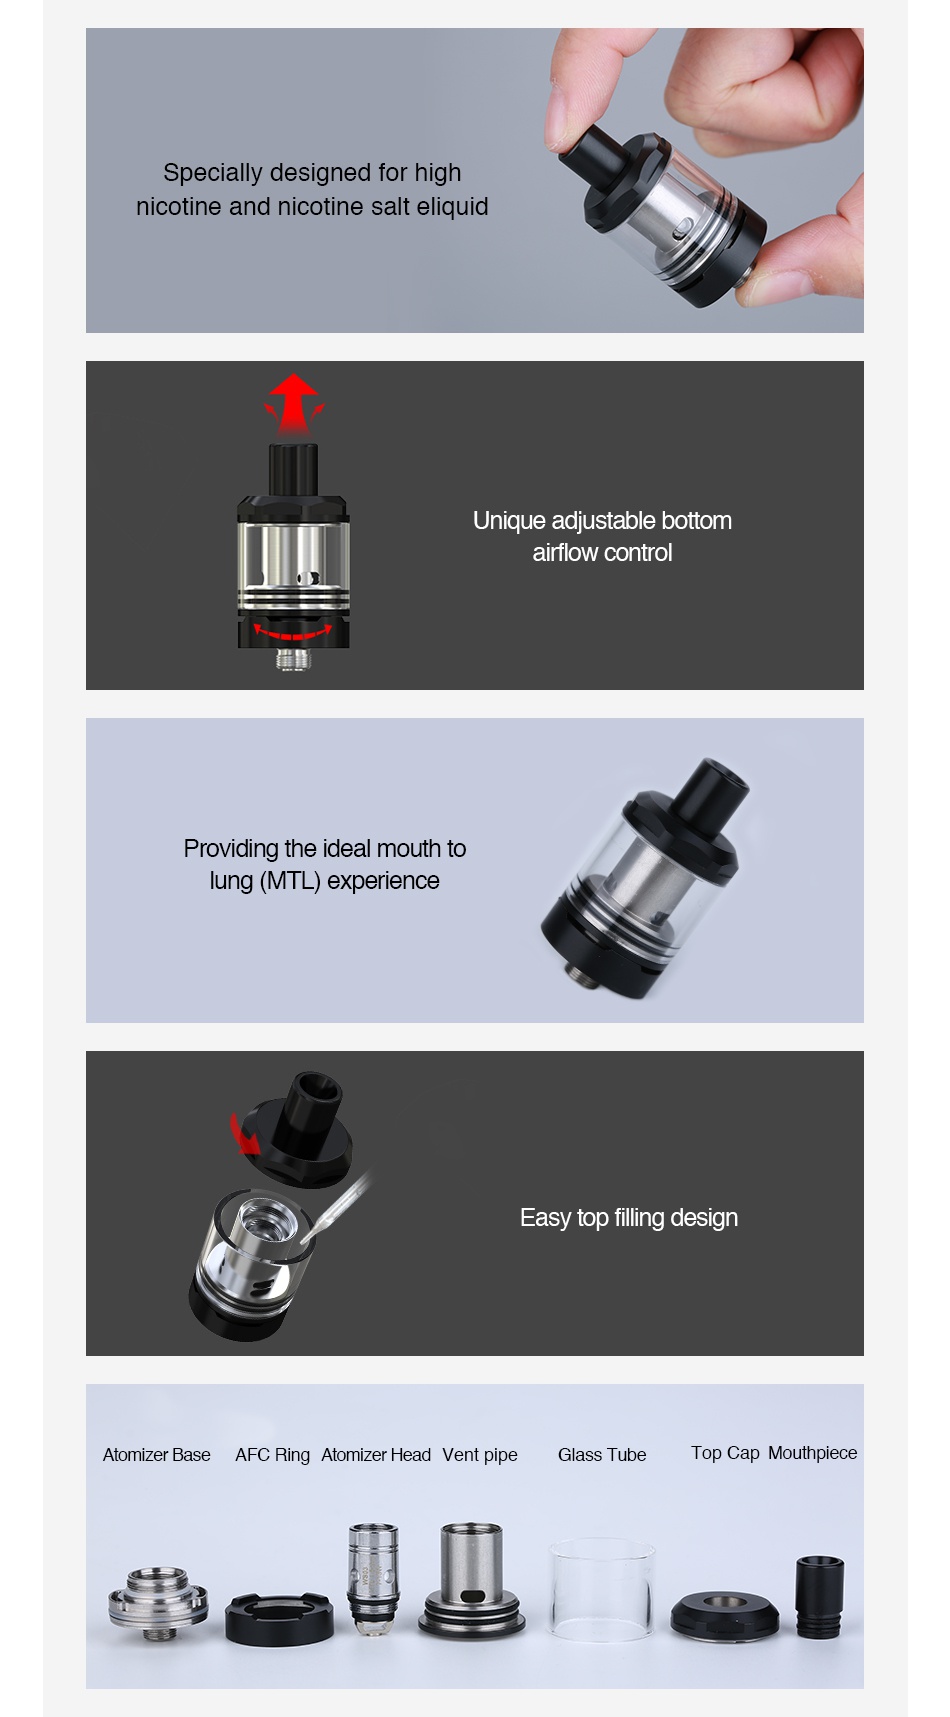 WISMEC AMOR NS Atomizer 2ml Specially designed for high nicotine and nicotine salt liquid Unique adiustable bottom allow control Providing the ideal mouth to lung MTL  experience Easy top filling design Atomizer Base AFC Ring Atomizer Head Vent pipe Glass Tube Top Cap Mouthpiece